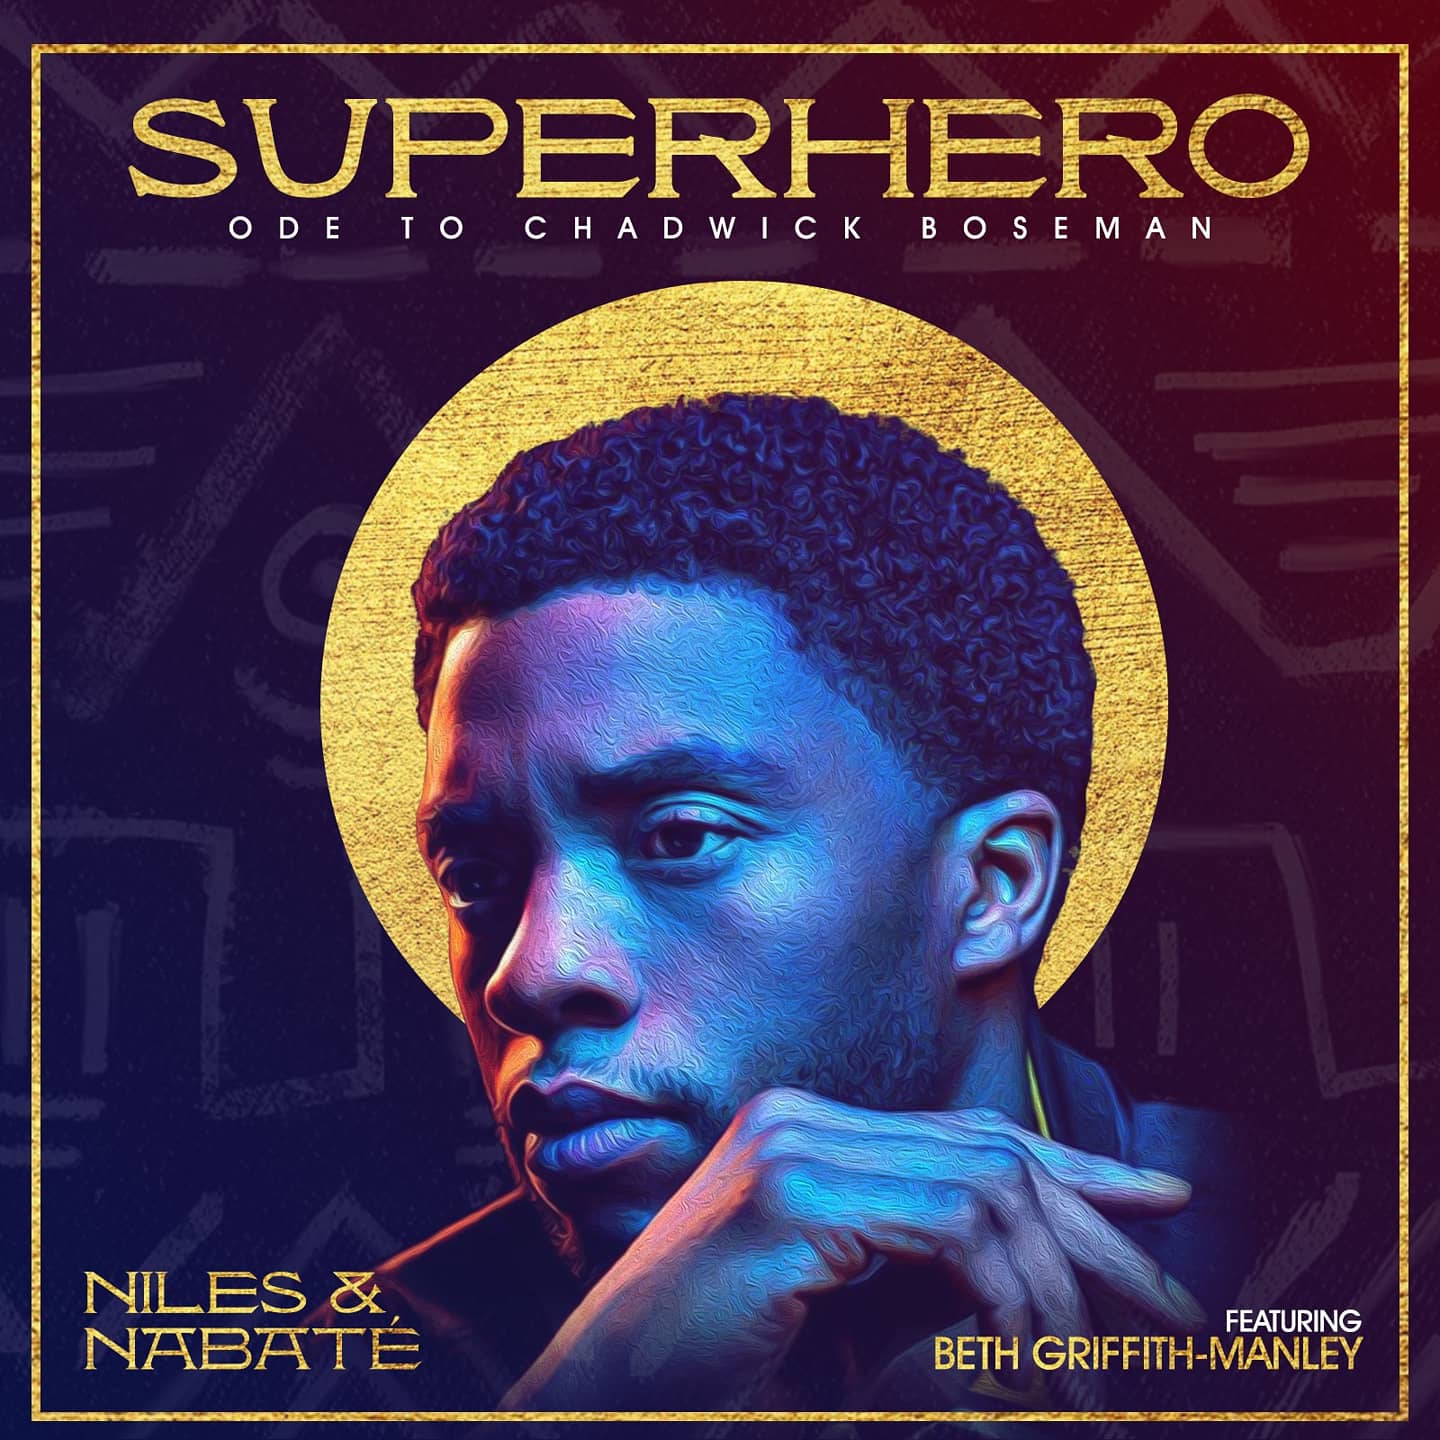  "Super Hero: Ode to Chadwick Boseman" by Hip-Hop Artist Niles, Grammy award winner Nabate Isles, and Beth Griffith-Man